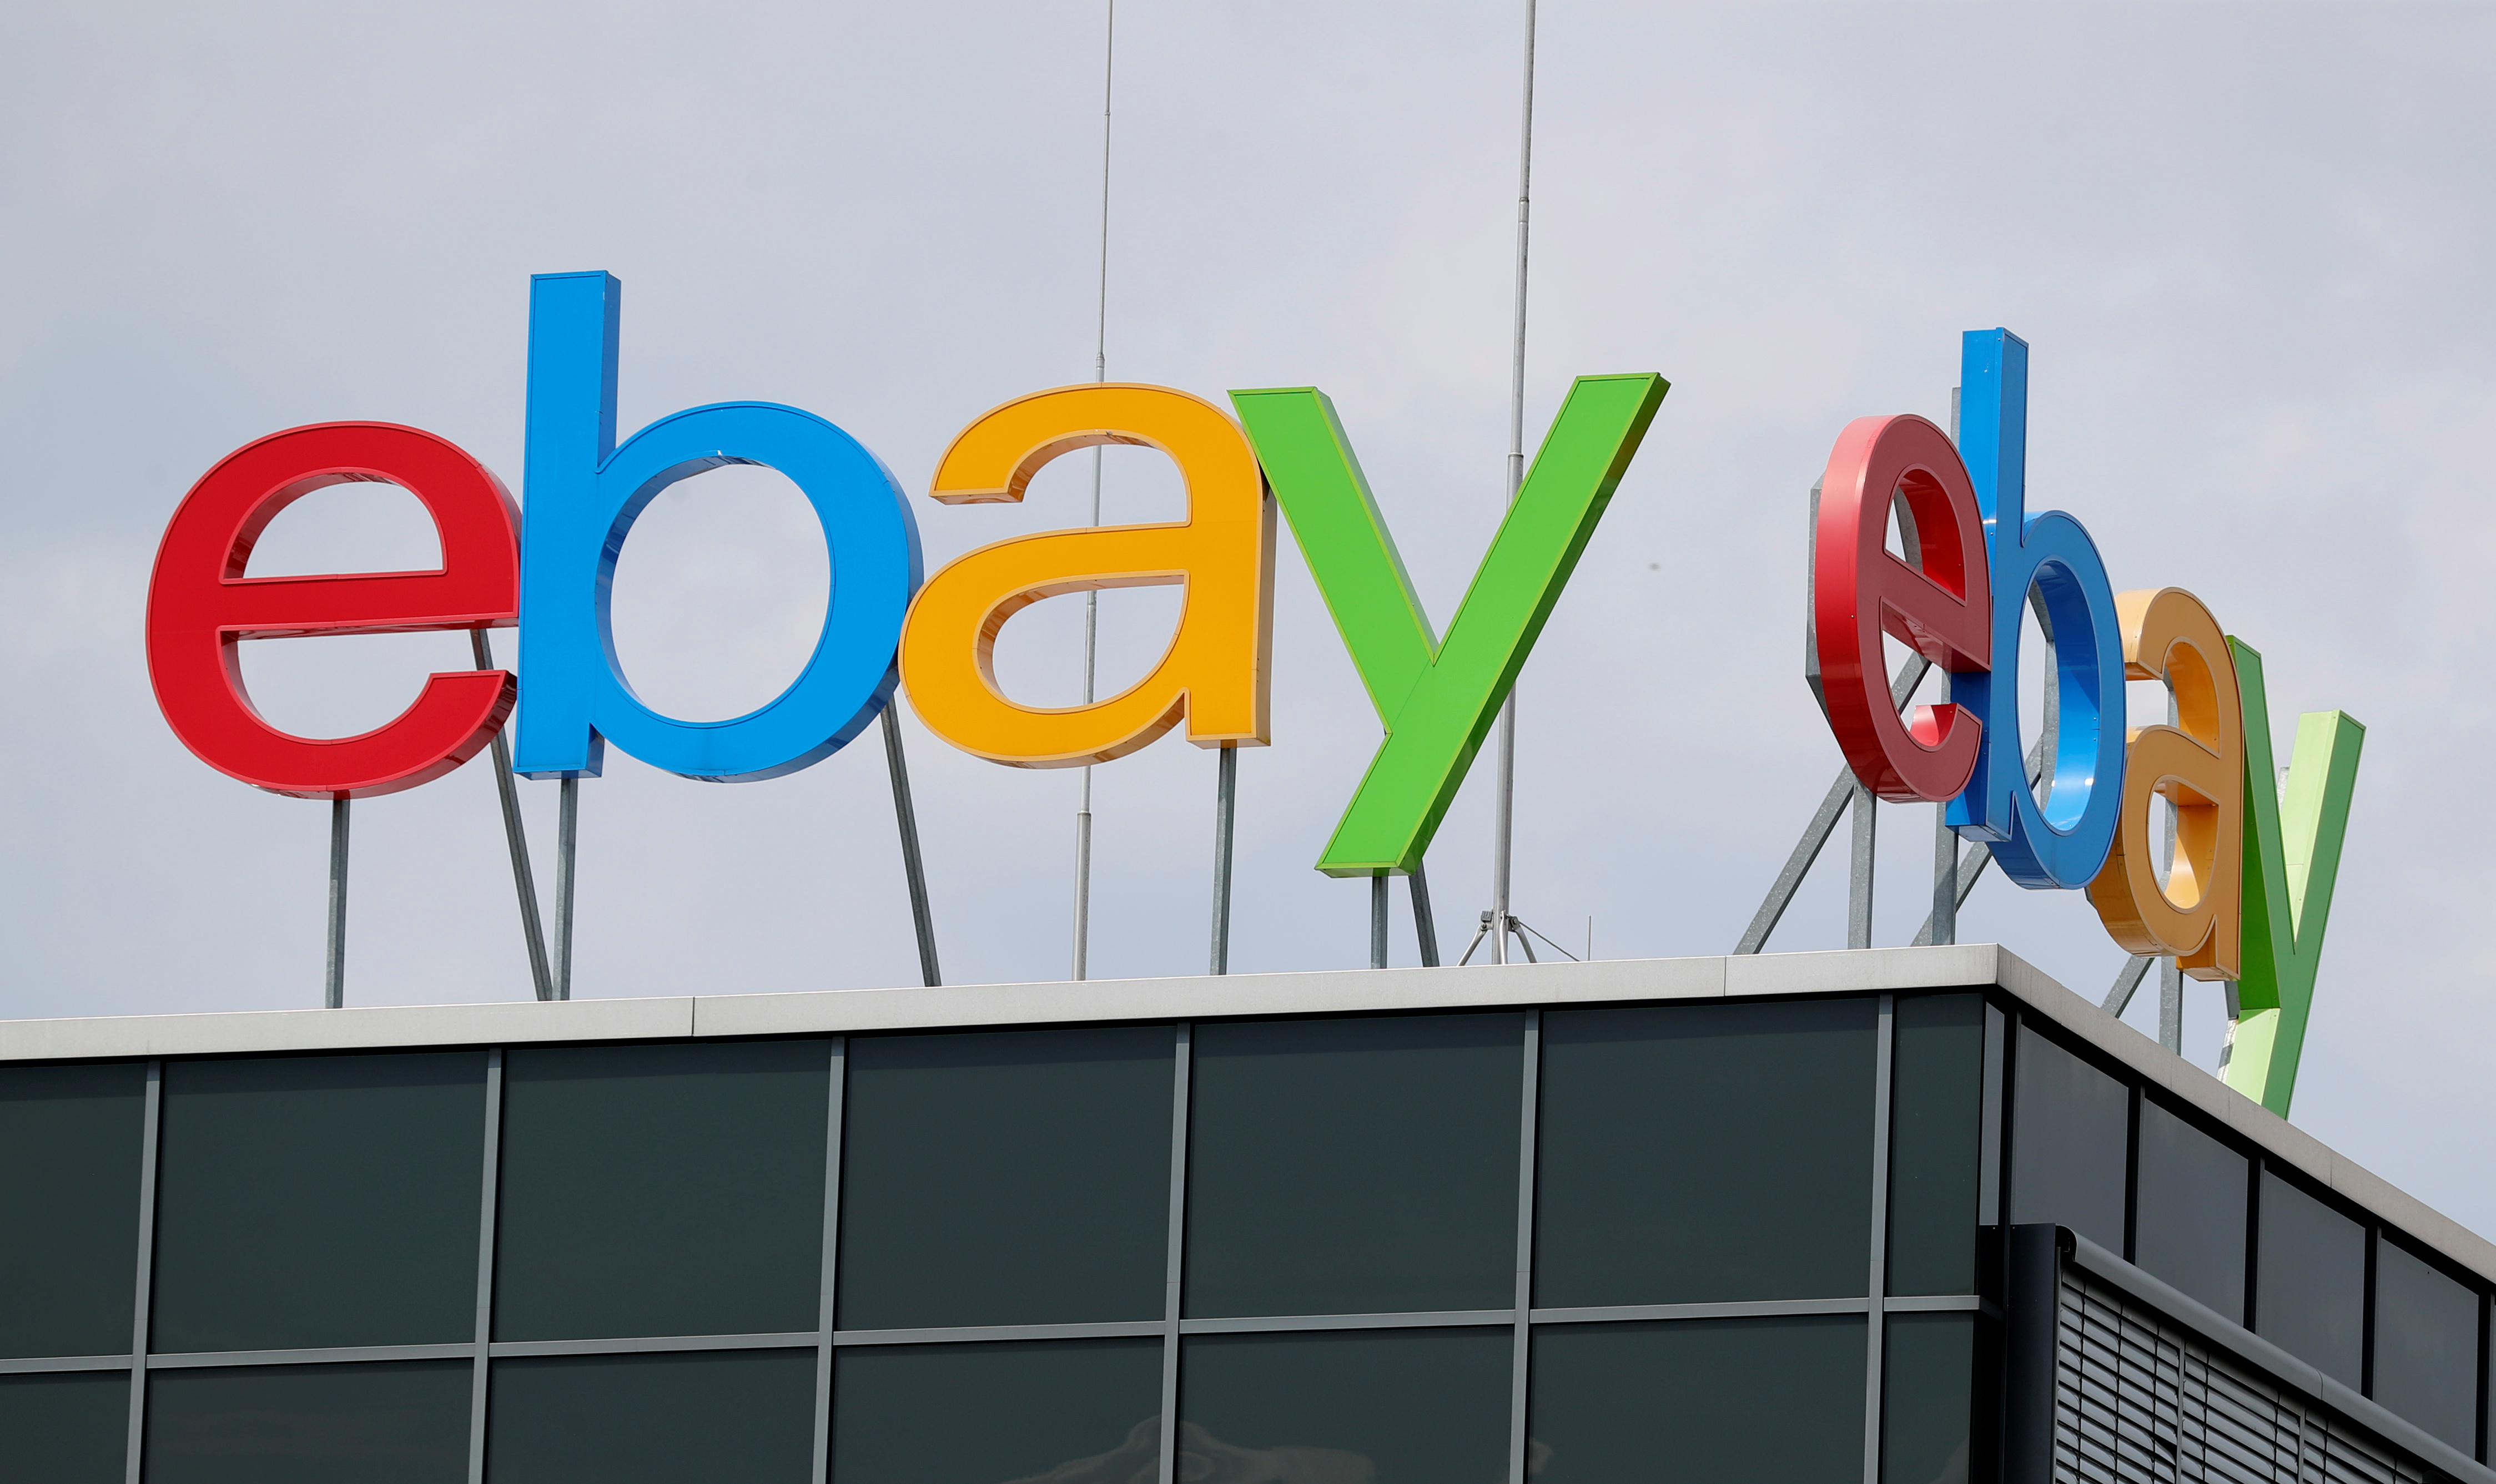 The German headquarters of eBay is pictured at Europarc Dreilinden business park south of Berlin in Kleinmachnow